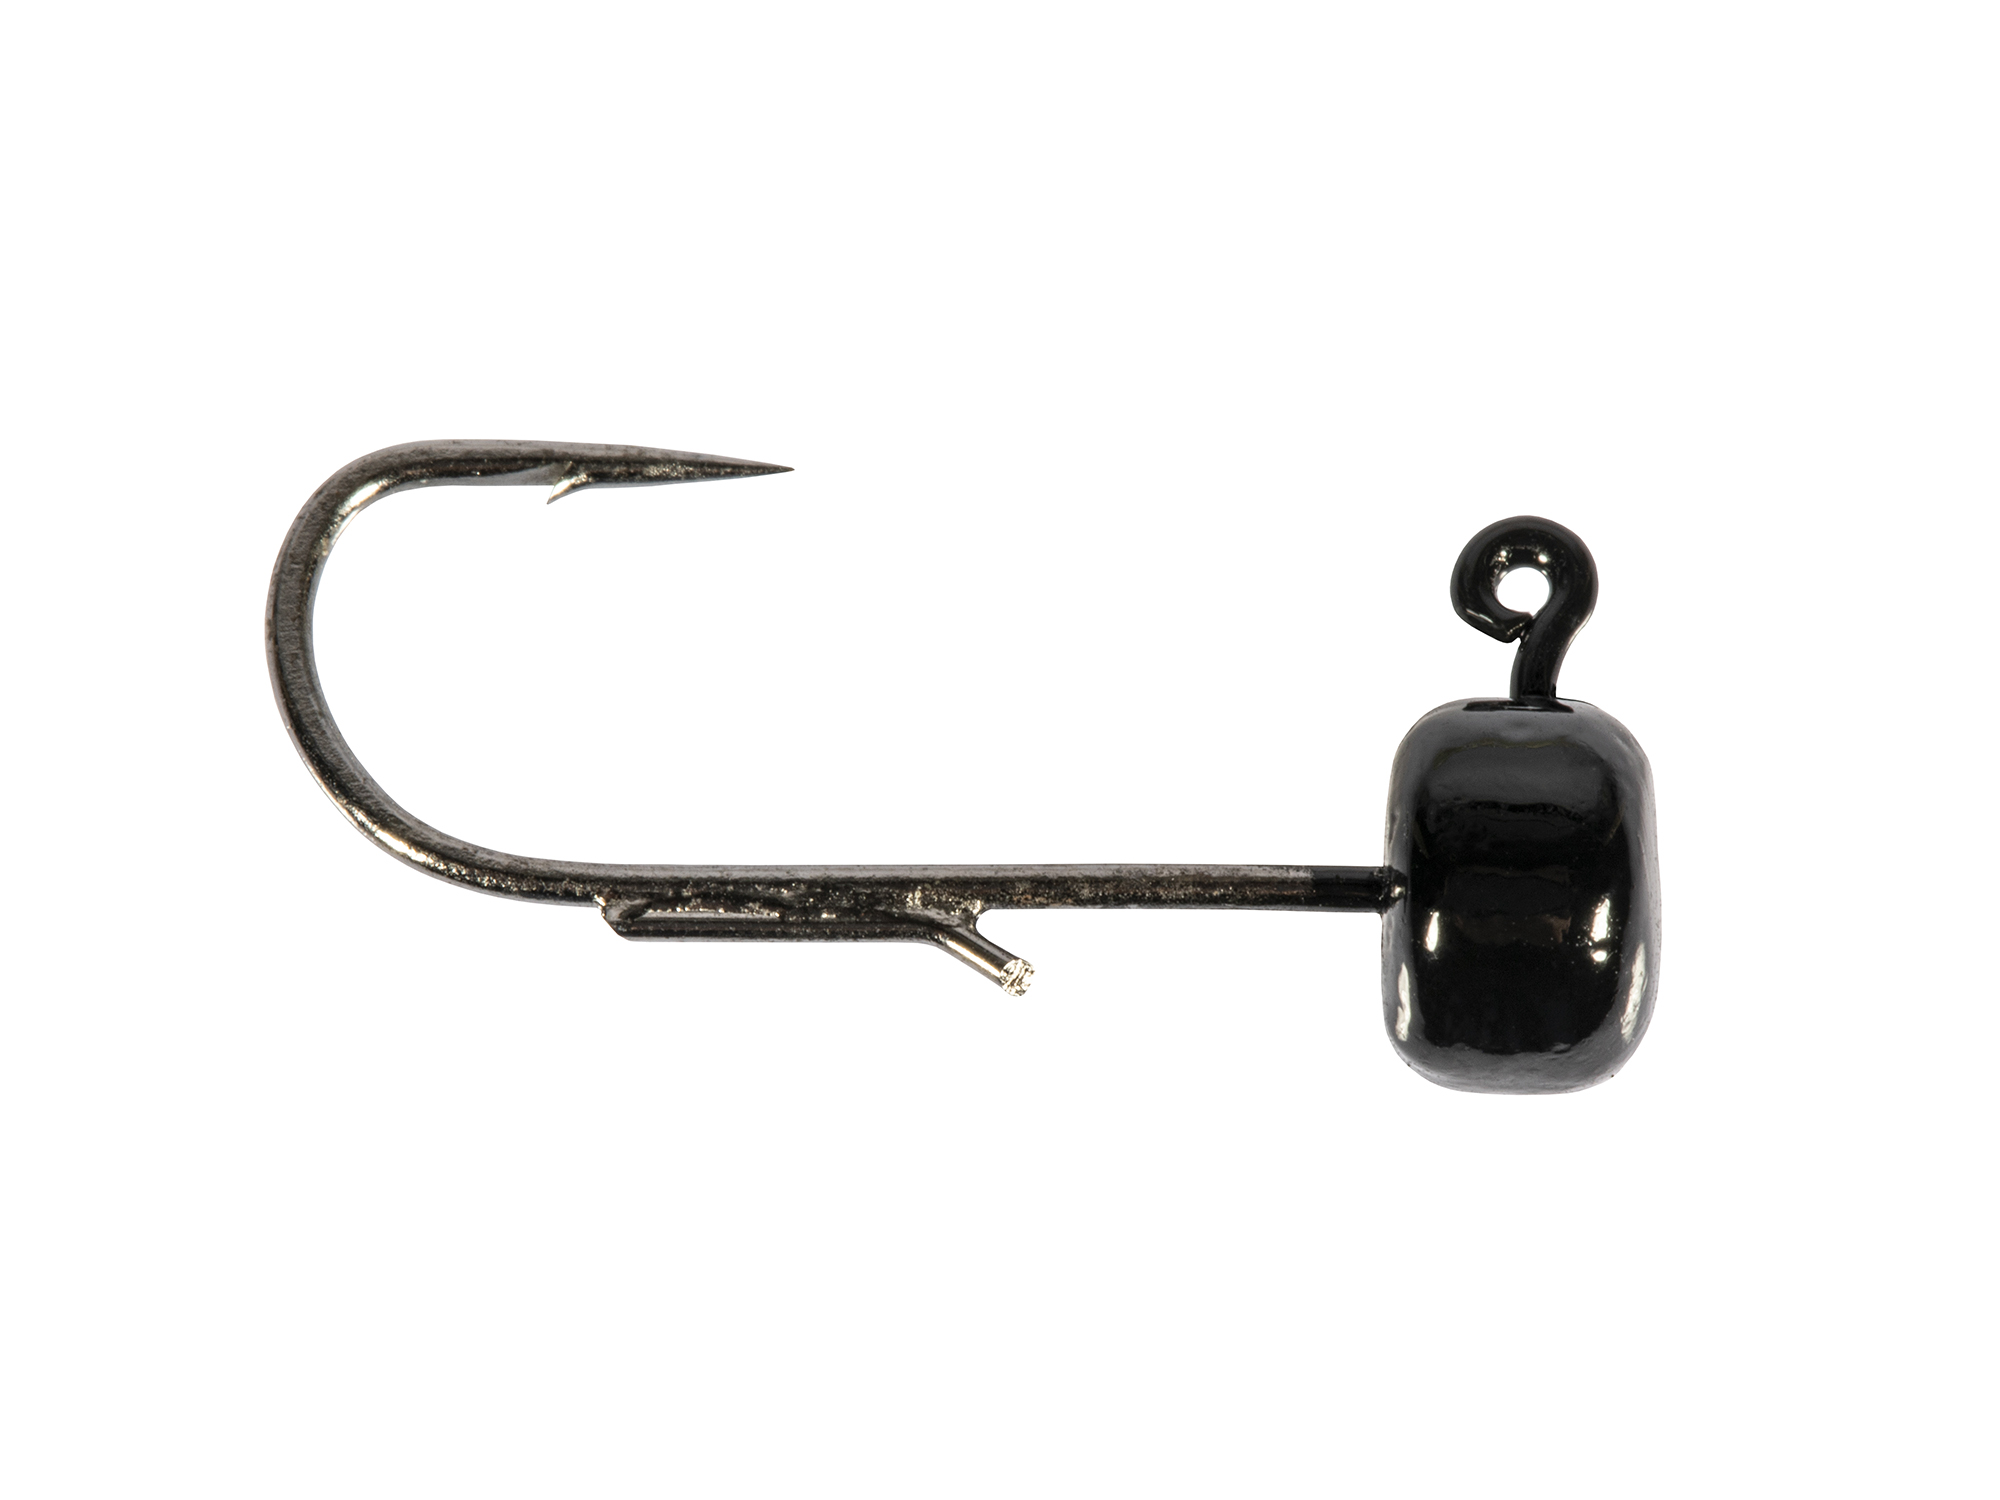 The regular Ned Rig setup - Z-Man Fishing Products